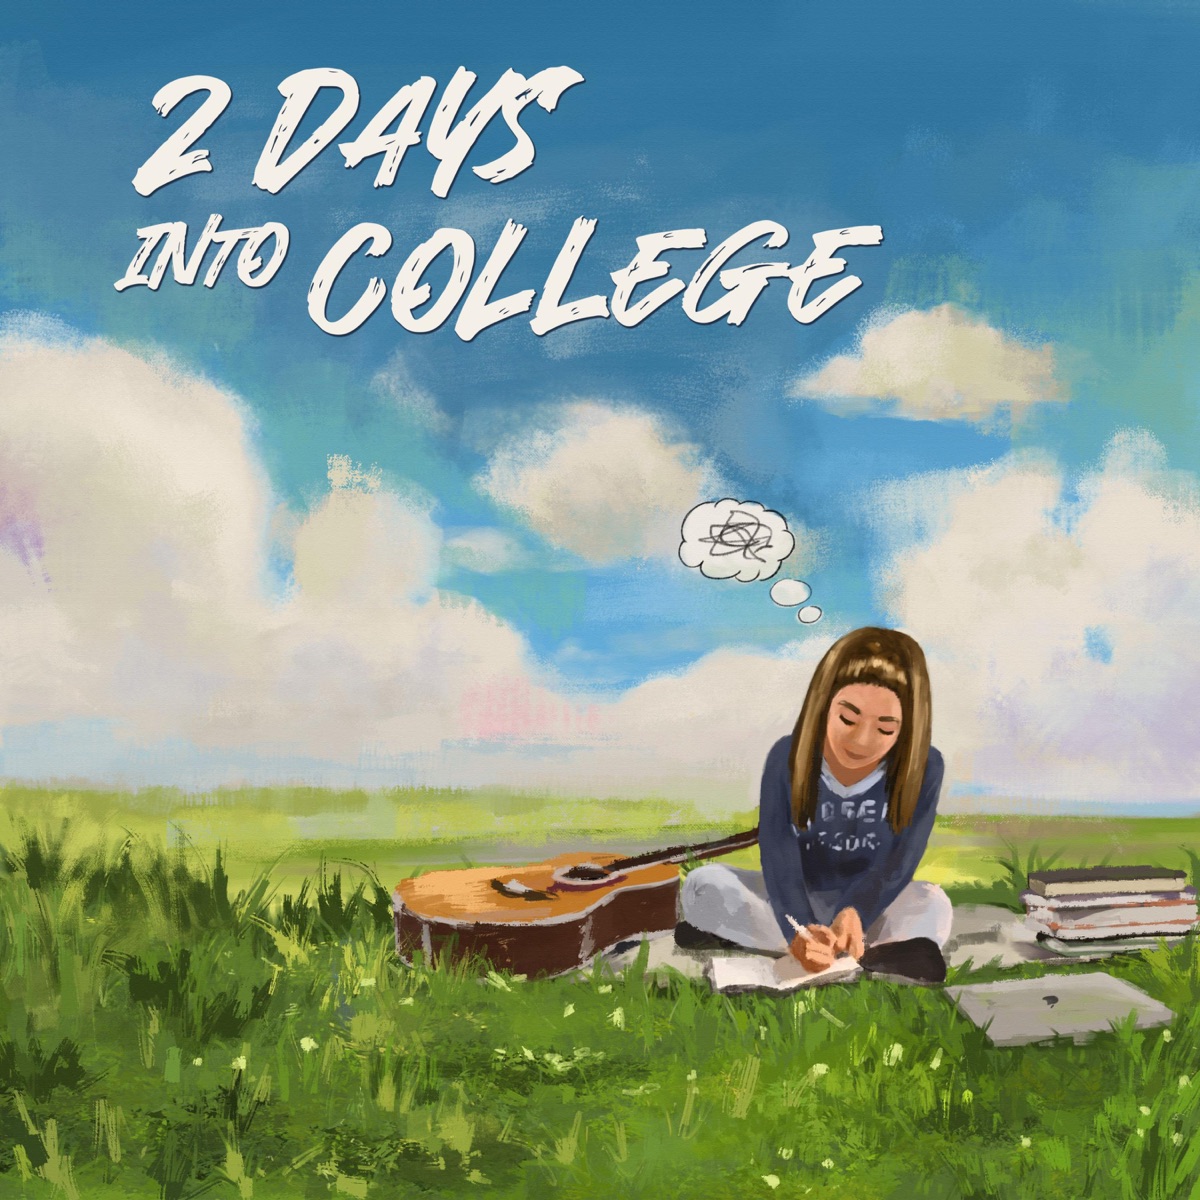 Aimee Cartys 2 Day Into College Spotify watercolor song cover.  